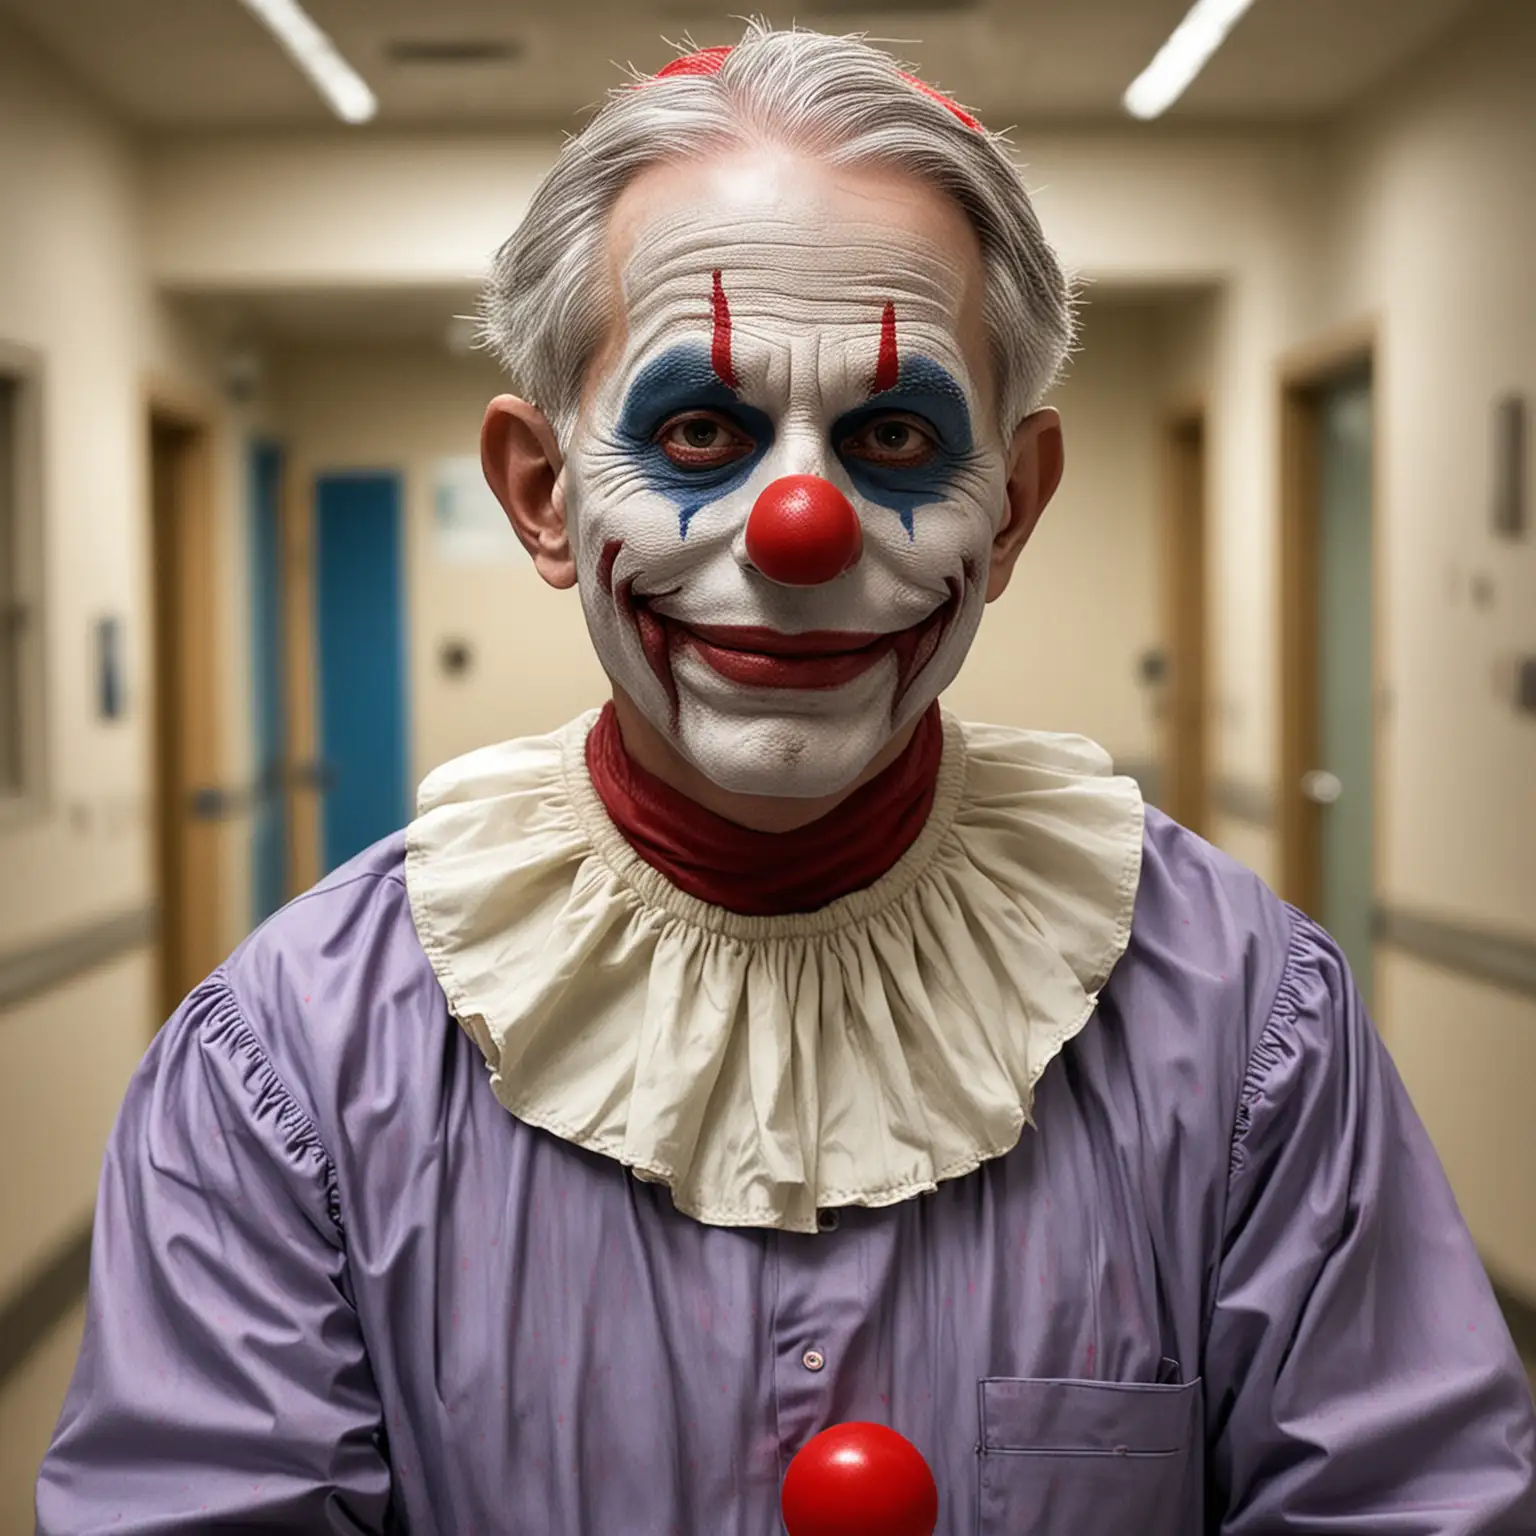 Dr Anthony Fauci as a killer clown in a hospital